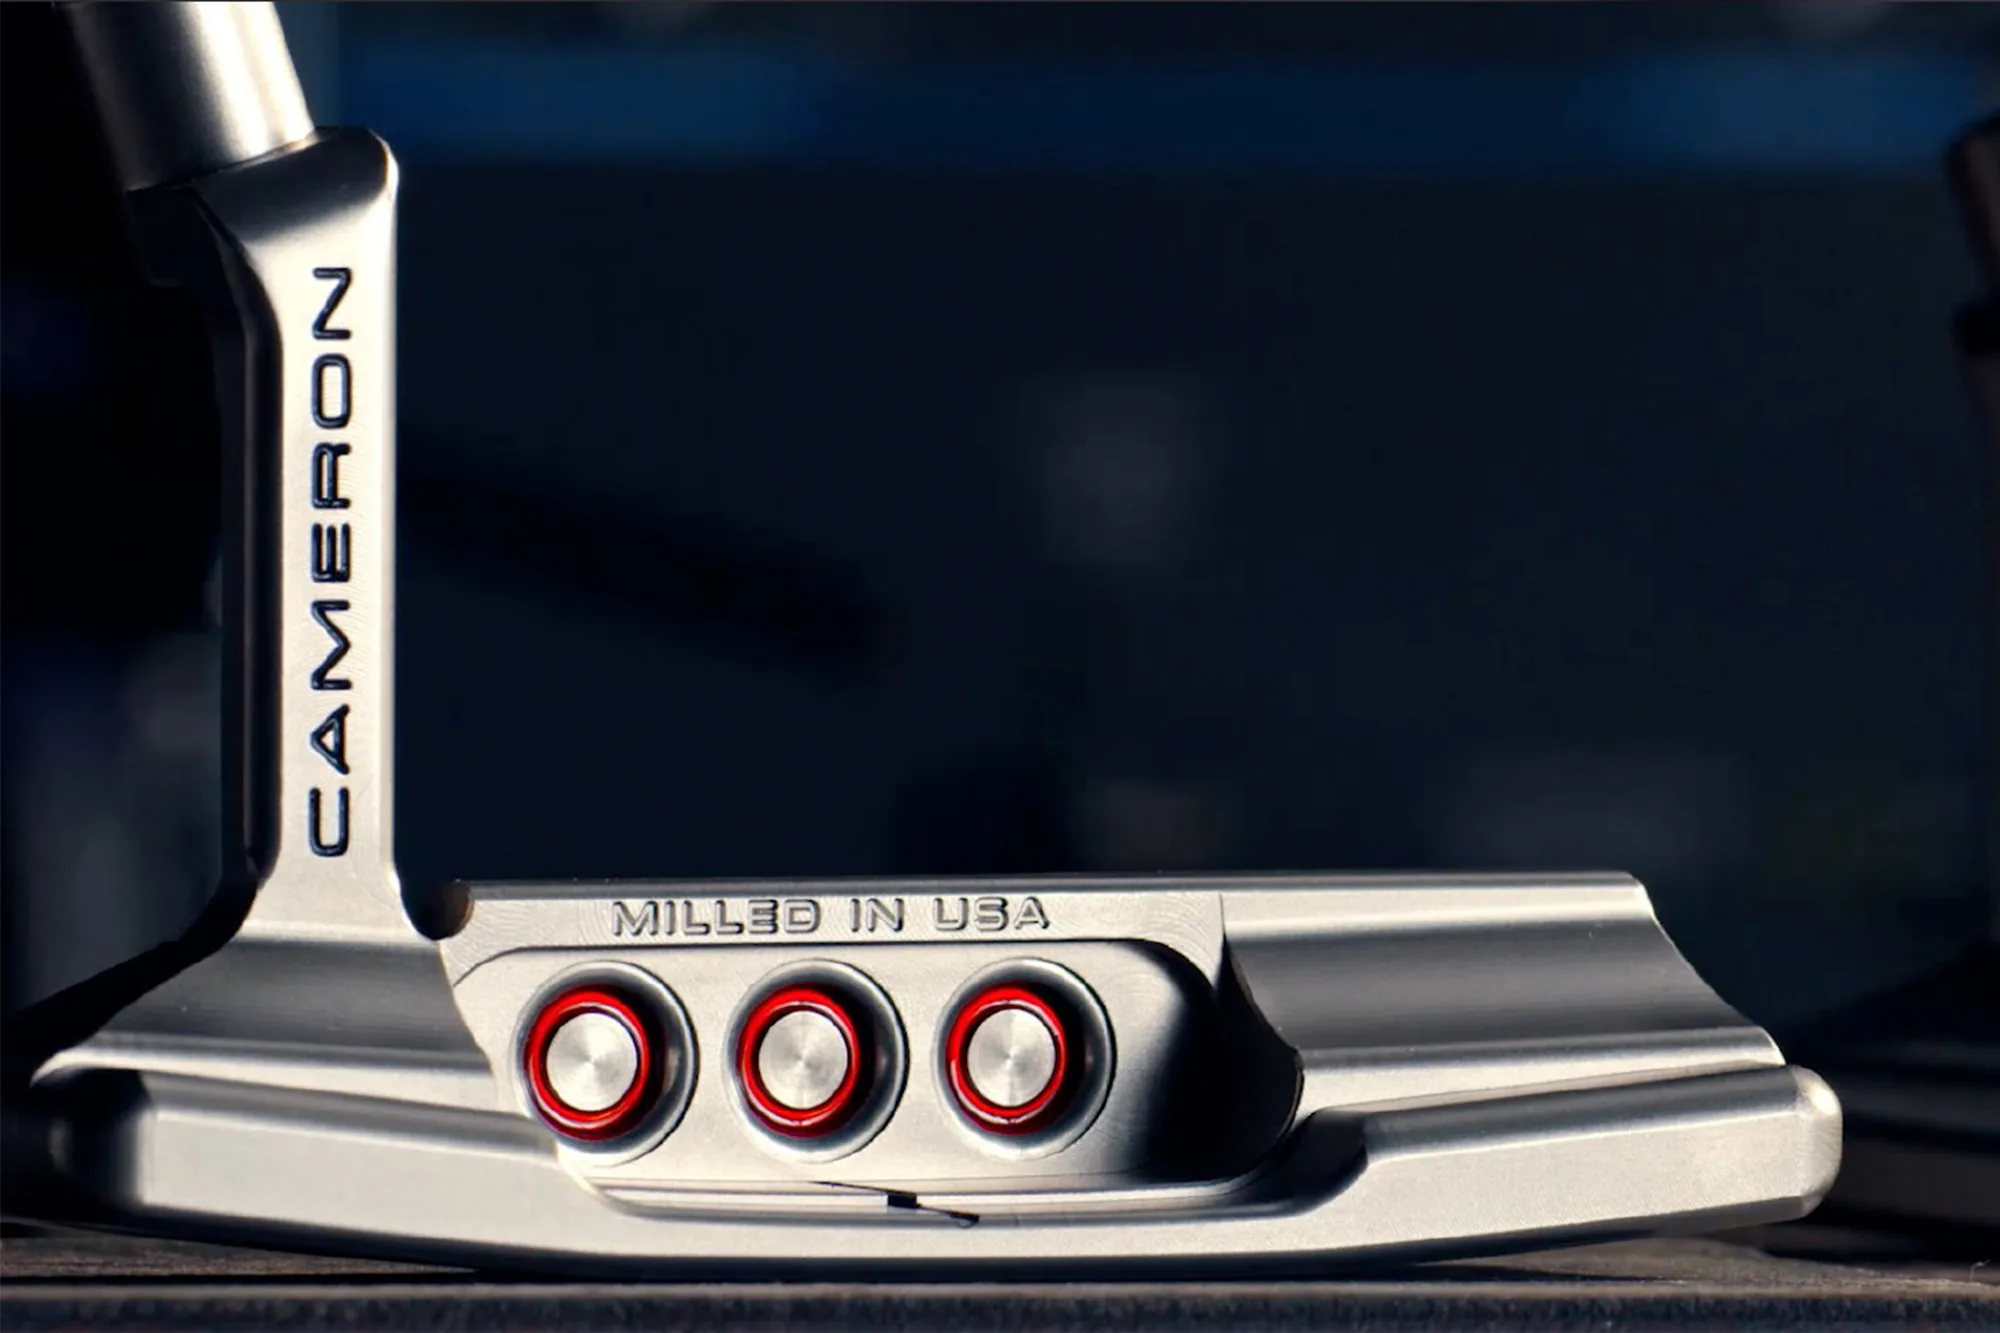 Buying Guides: Best Scotty Cameron putters